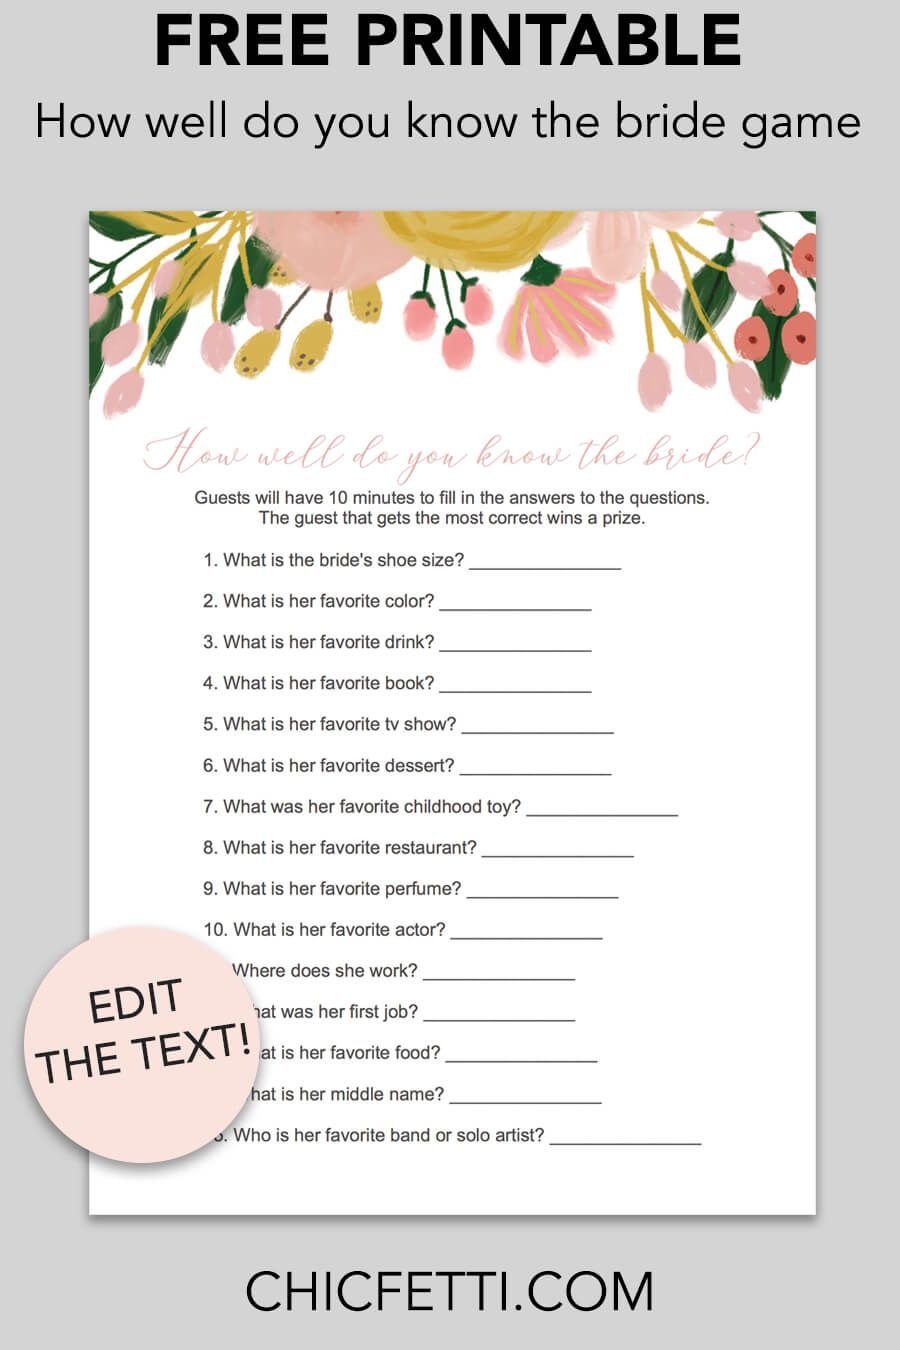 How Well Do You Know The Bride Bridal Shower Game (Whimsical - How Well Do You Know The Bride Game Free Printable